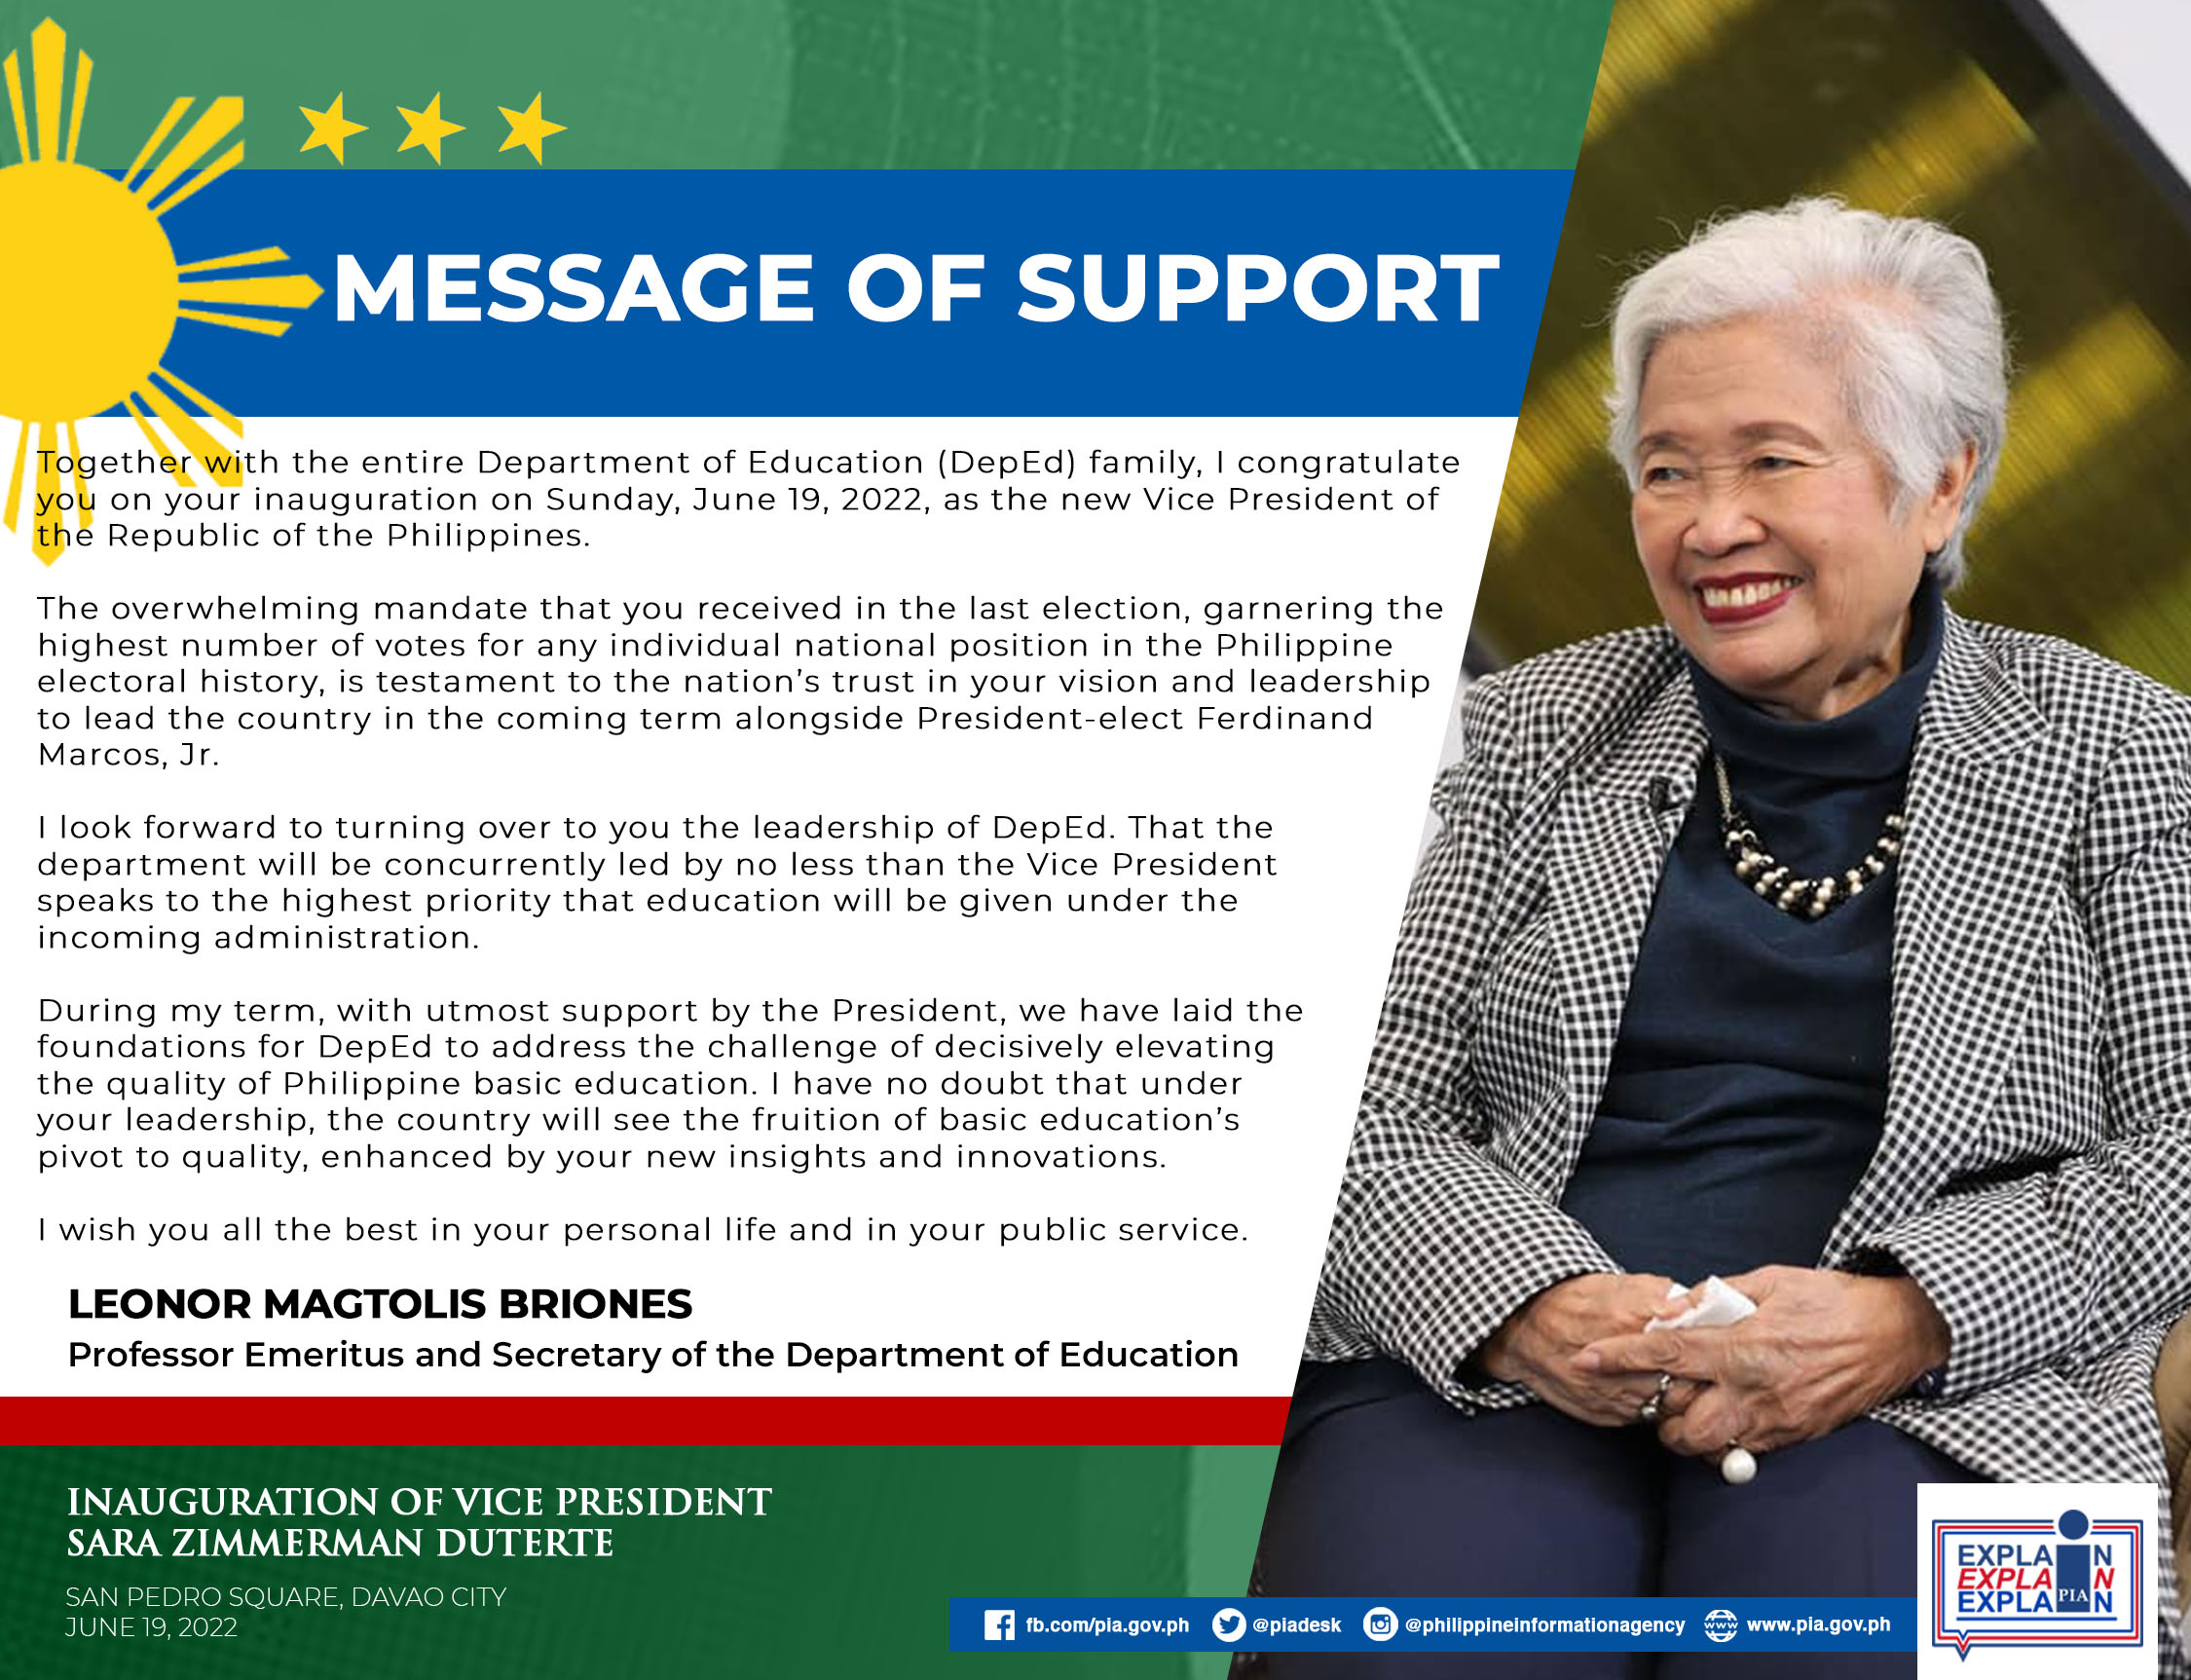 Message of Support from DepEd Secretary Leonor Magtolis Briones to Vice-President elect Sara Z. Duterte